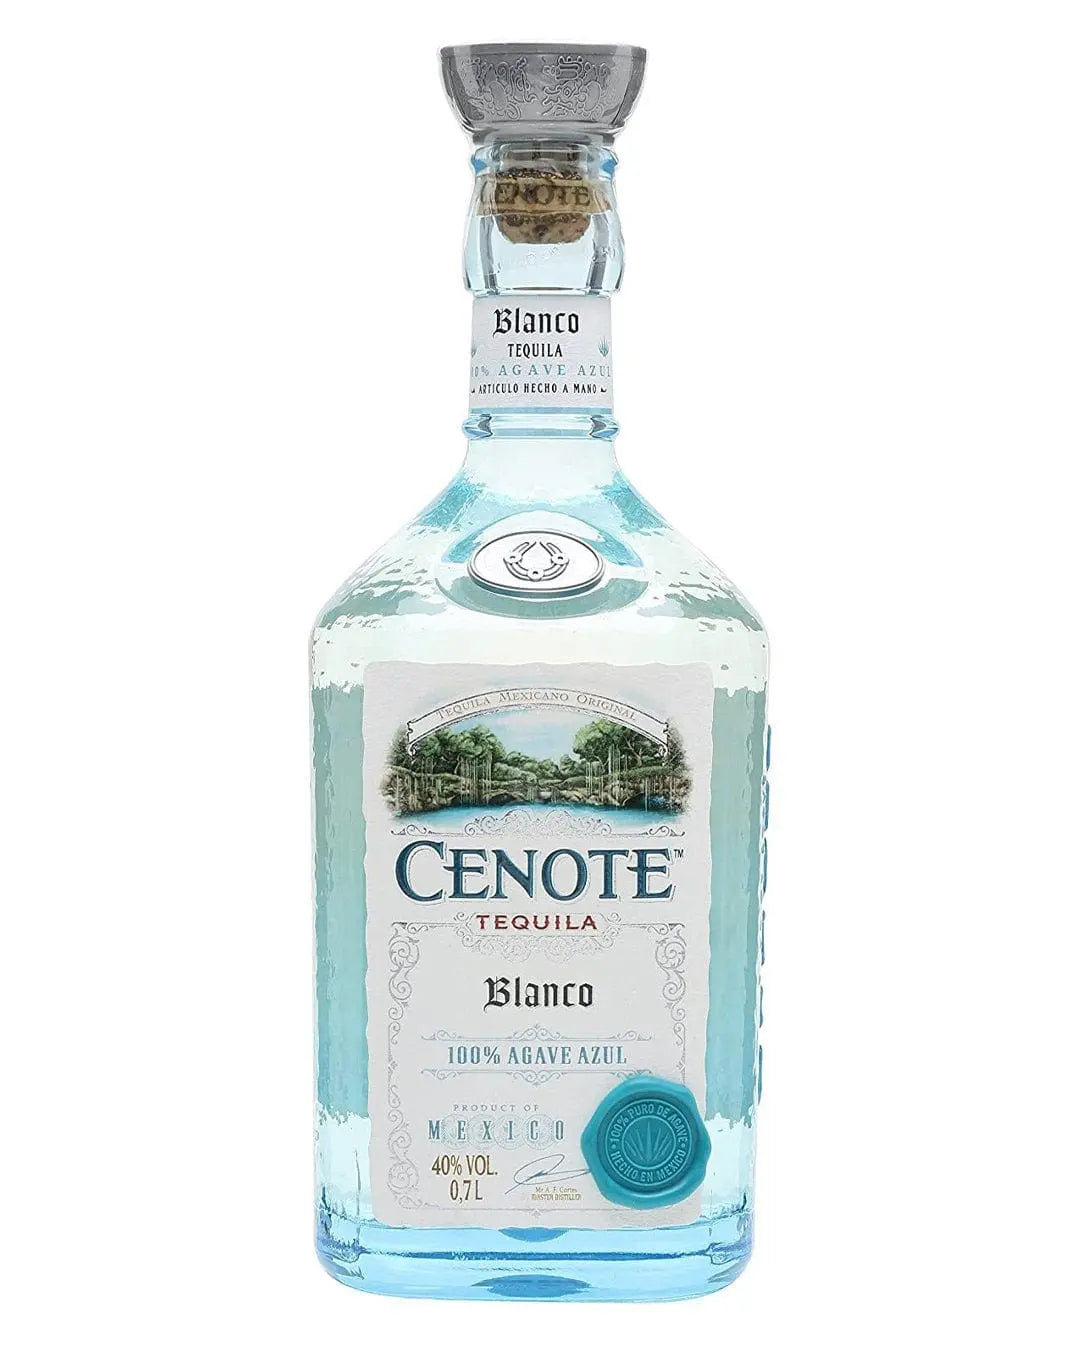 Cenote Tequila Blanco, 70 cl Tequila & Mezcal 7503023613248